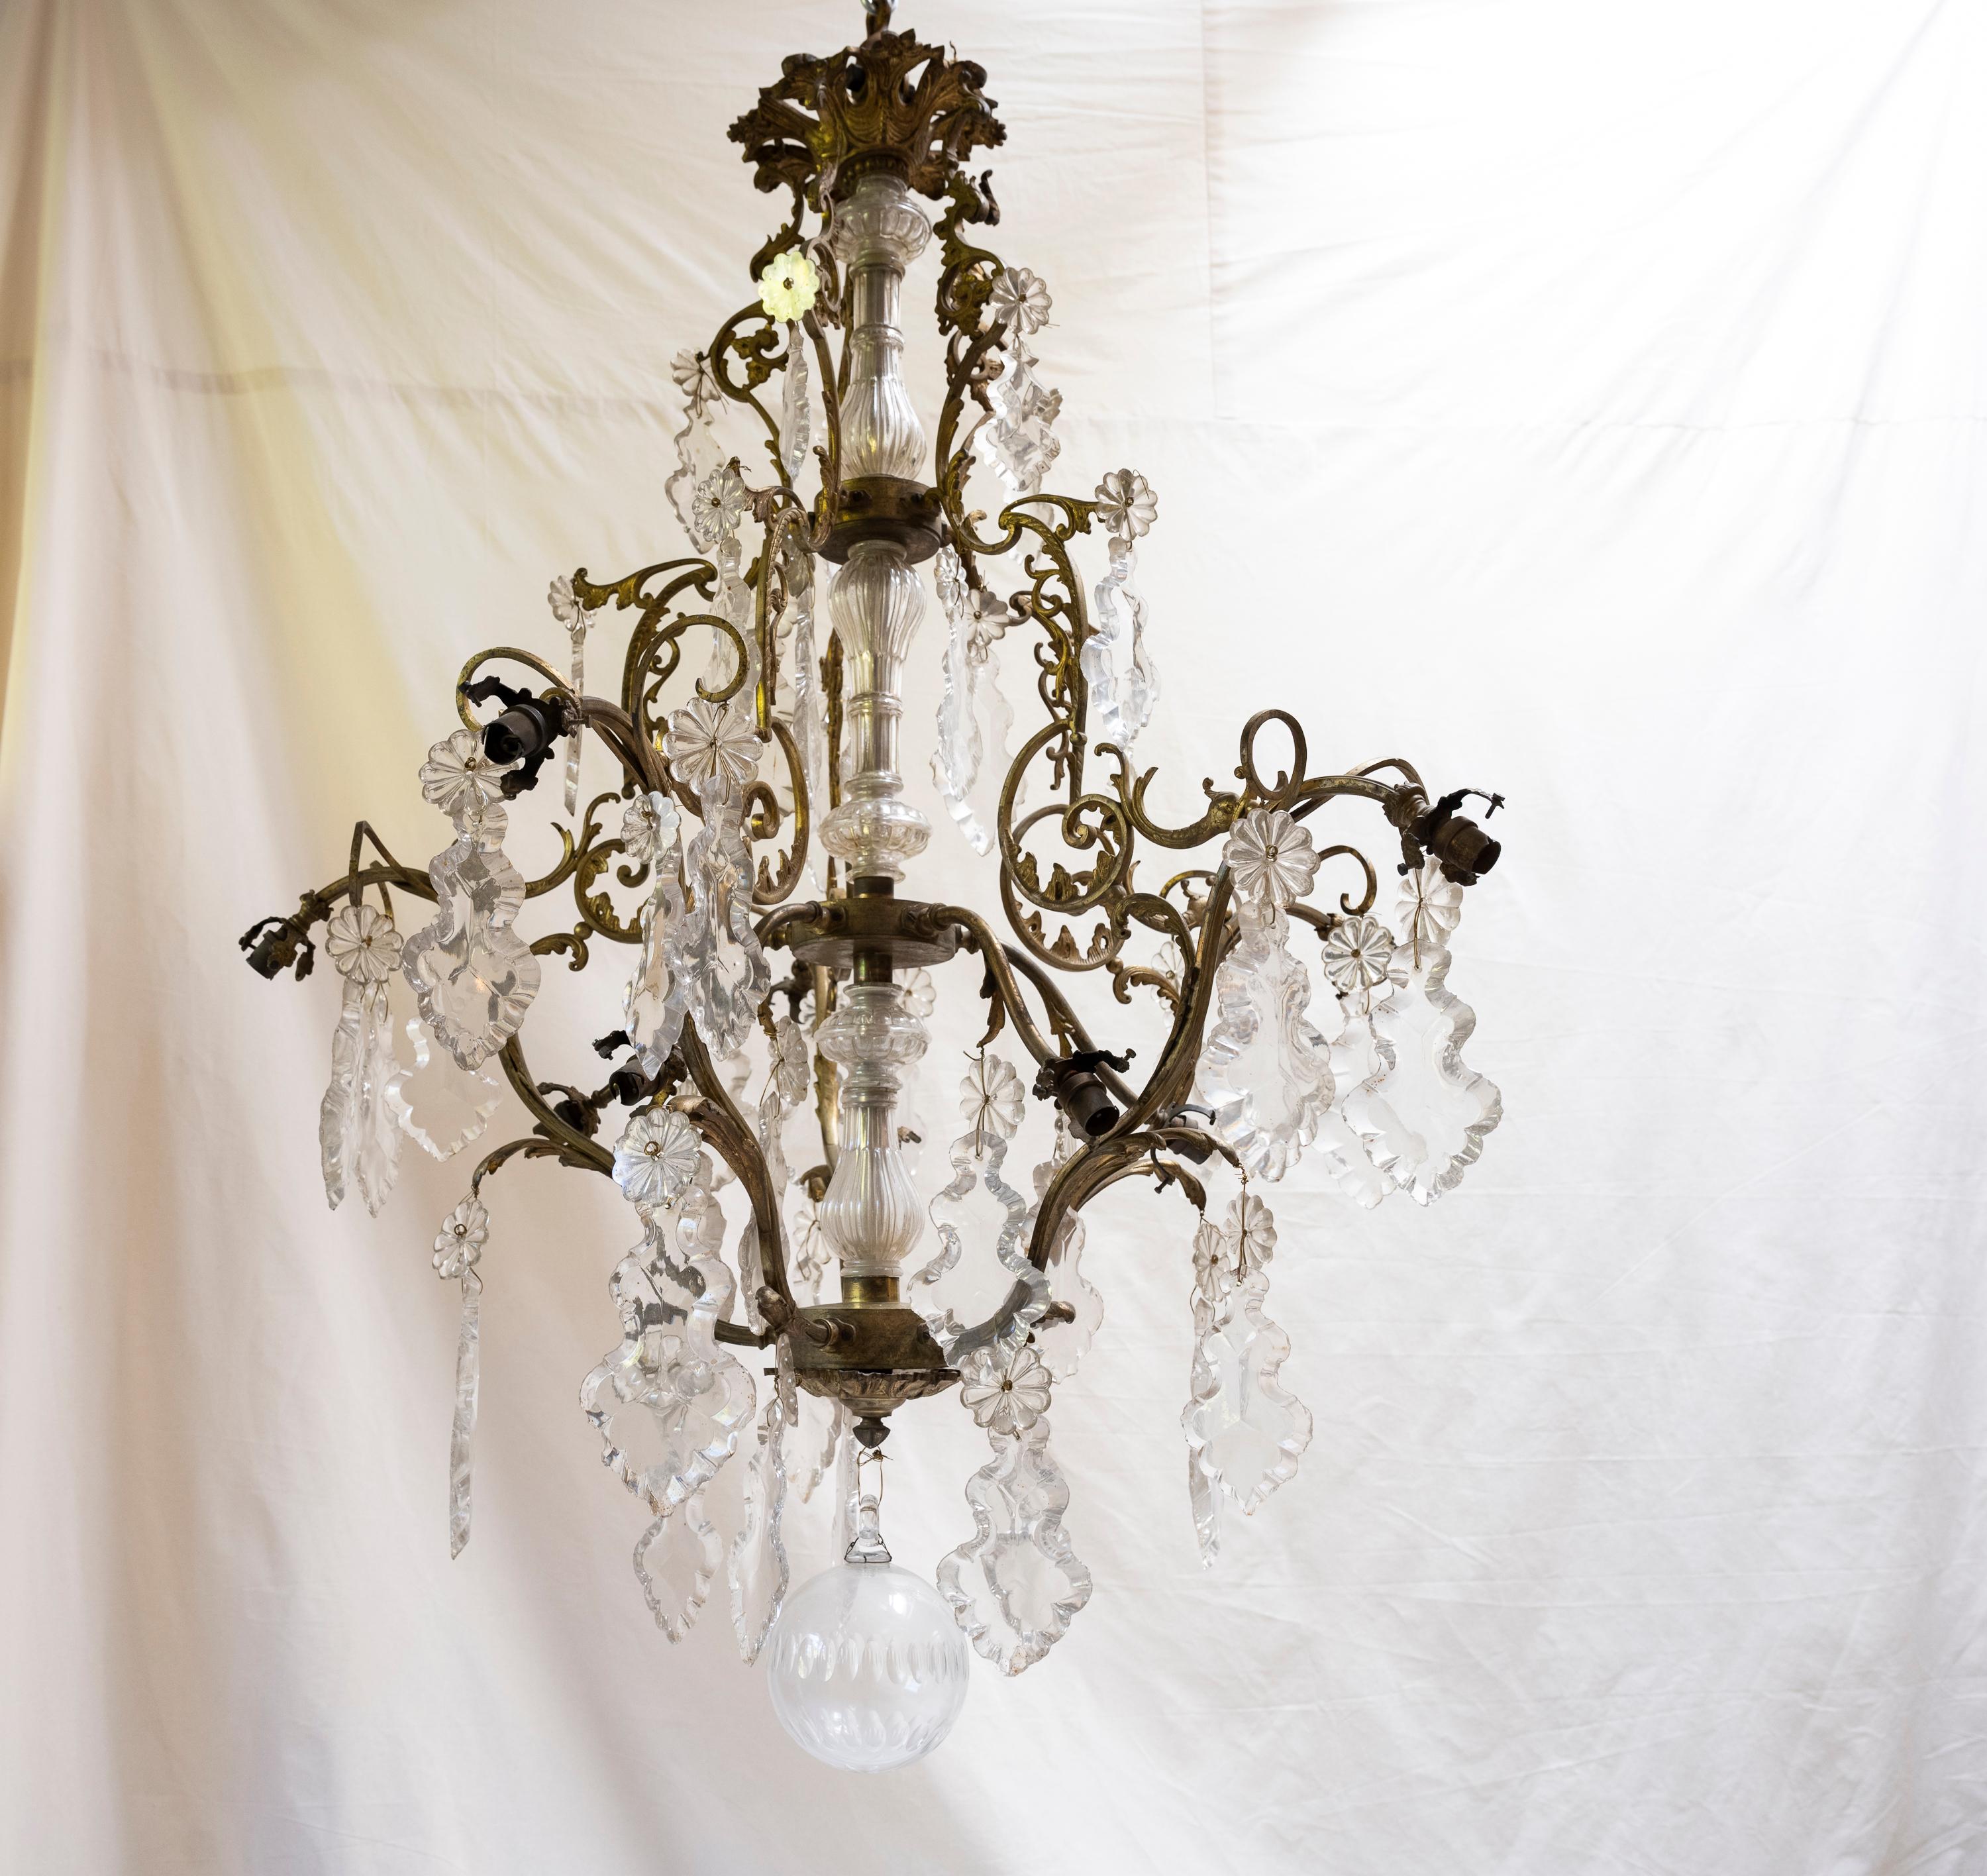 Large and incredibly gorgeous, this chandelier hung prominently in a dining room of a family’s chateau.
There are several chips on many of the crystal pendants, and the original bulb covers are missing.
Can be used decoratively, or can be rewired